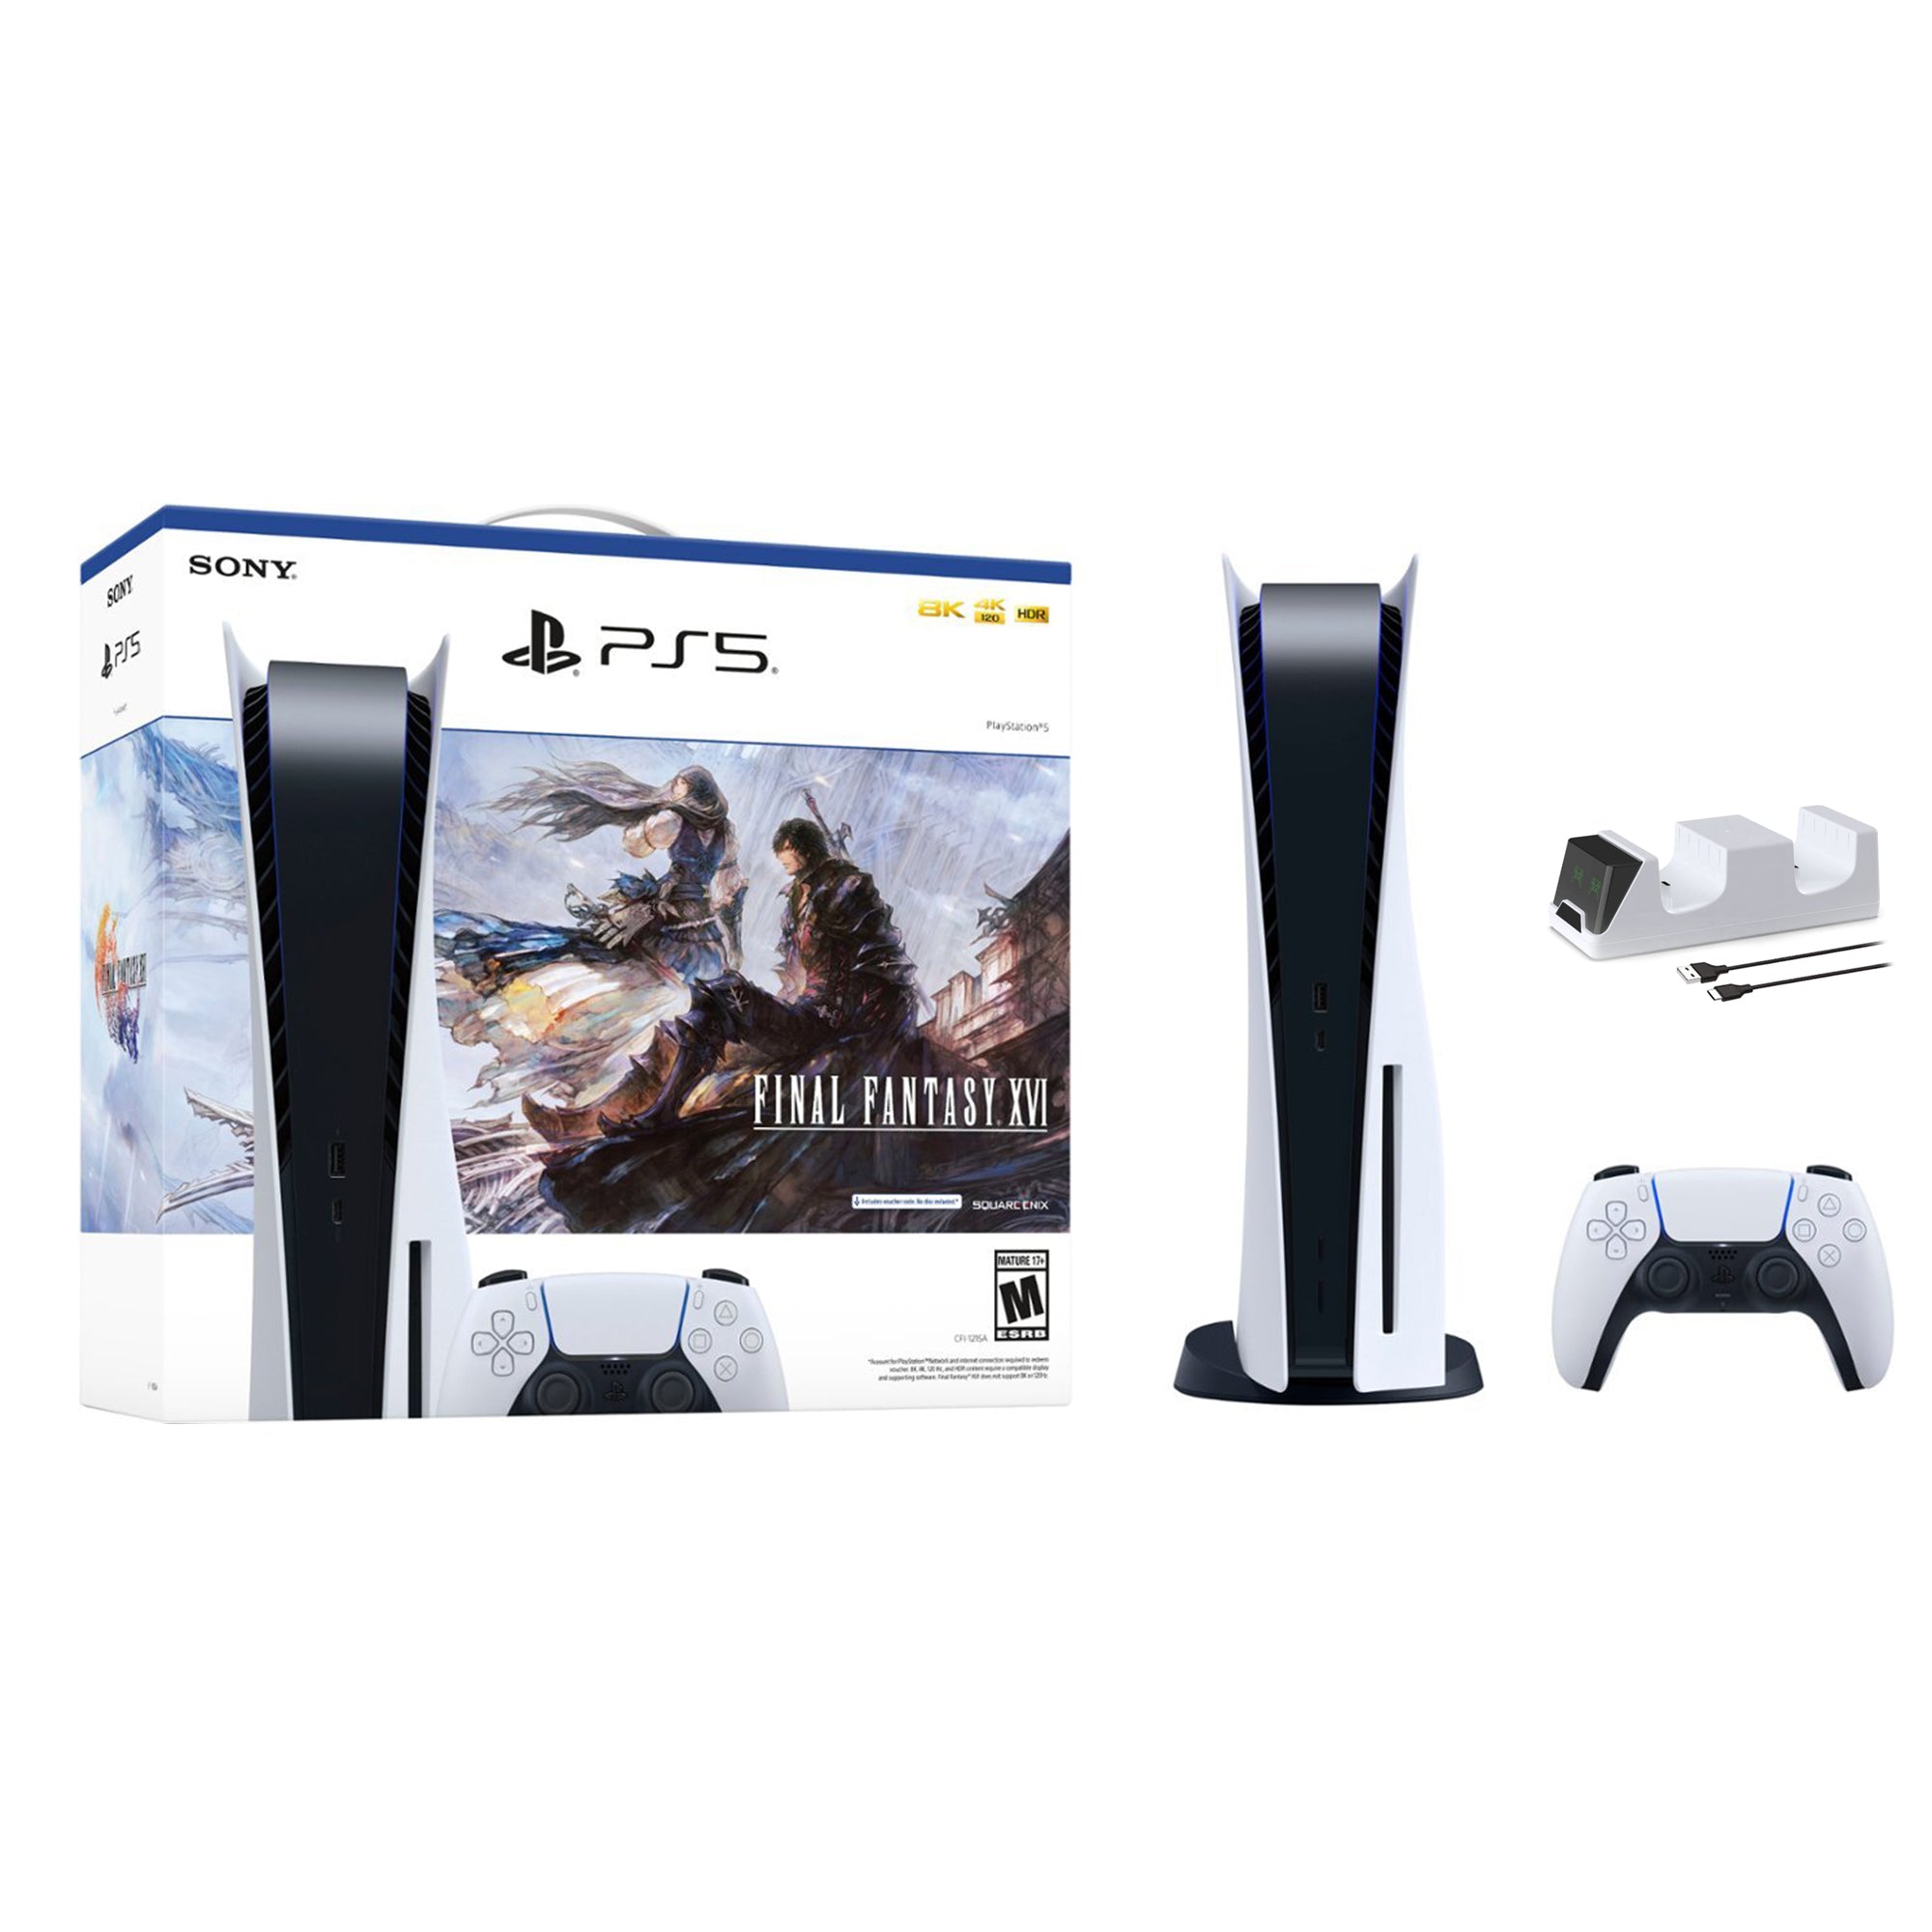 PlayStation 5 Disc Edition FINAL FANTASY XVI Bundle and Mytrix Controller Charger - White, PS5 825GB Gaming Console